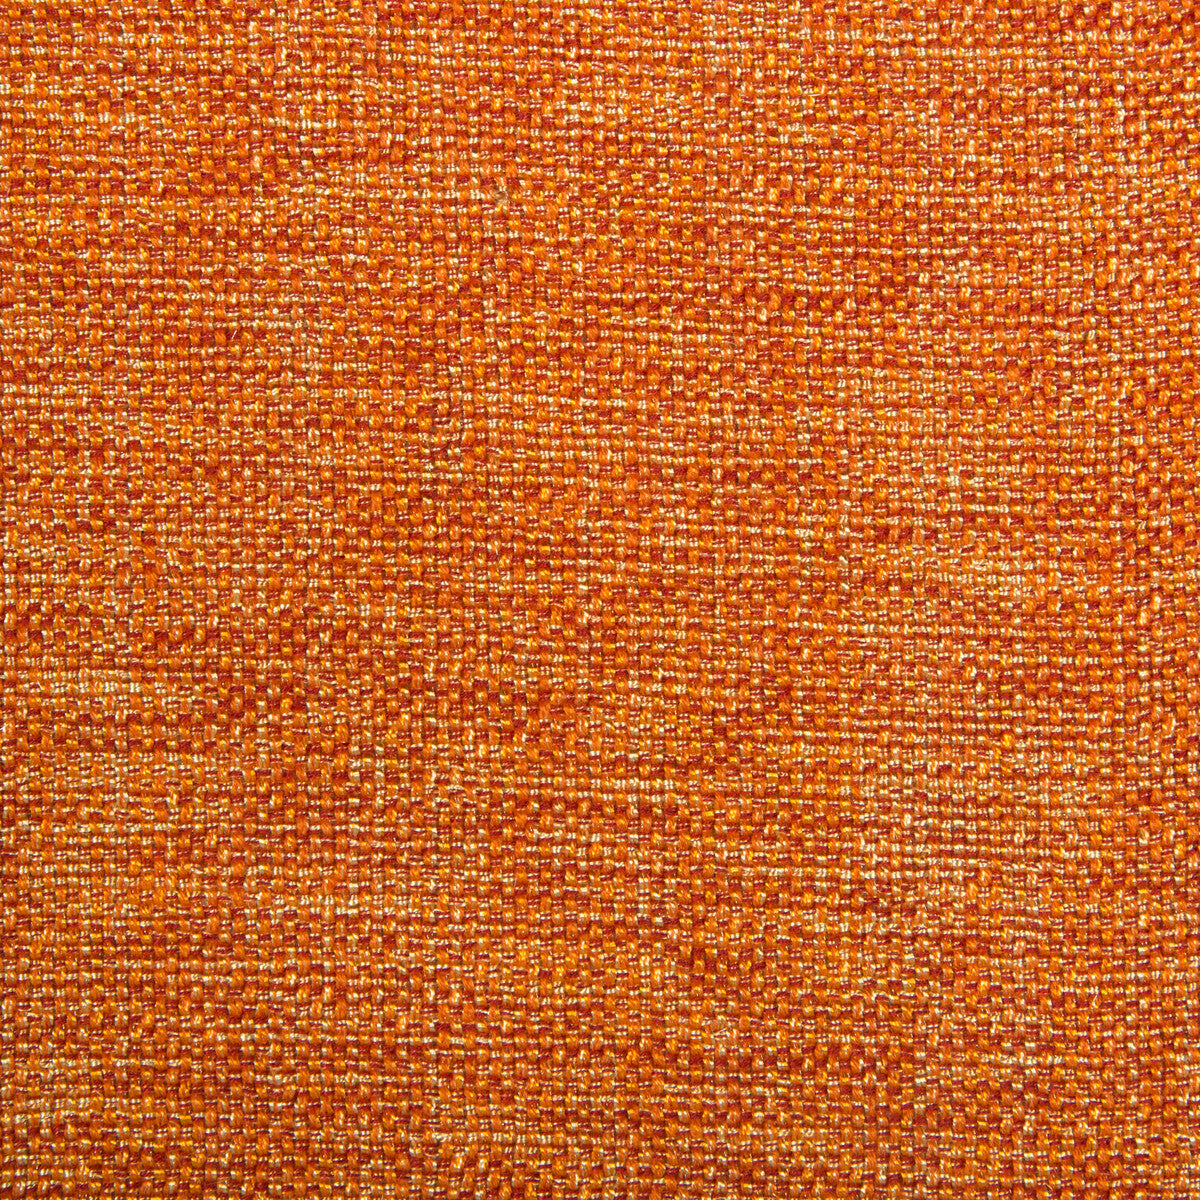 Kravet Contract fabric in 34926-912 color - pattern 34926.912.0 - by Kravet Contract